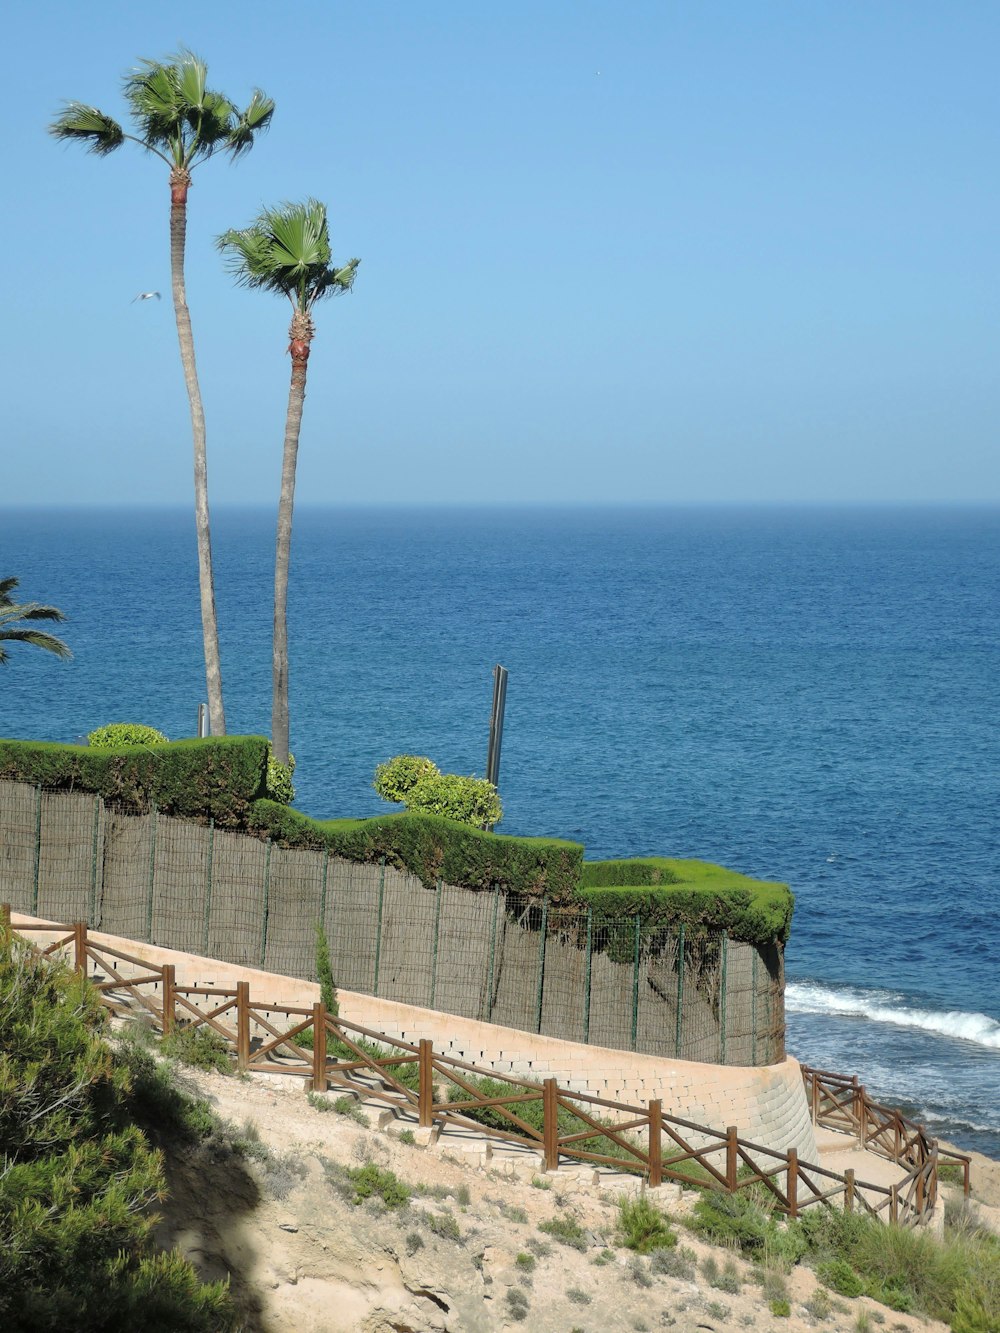 a view of a beach with a fence and palm trees